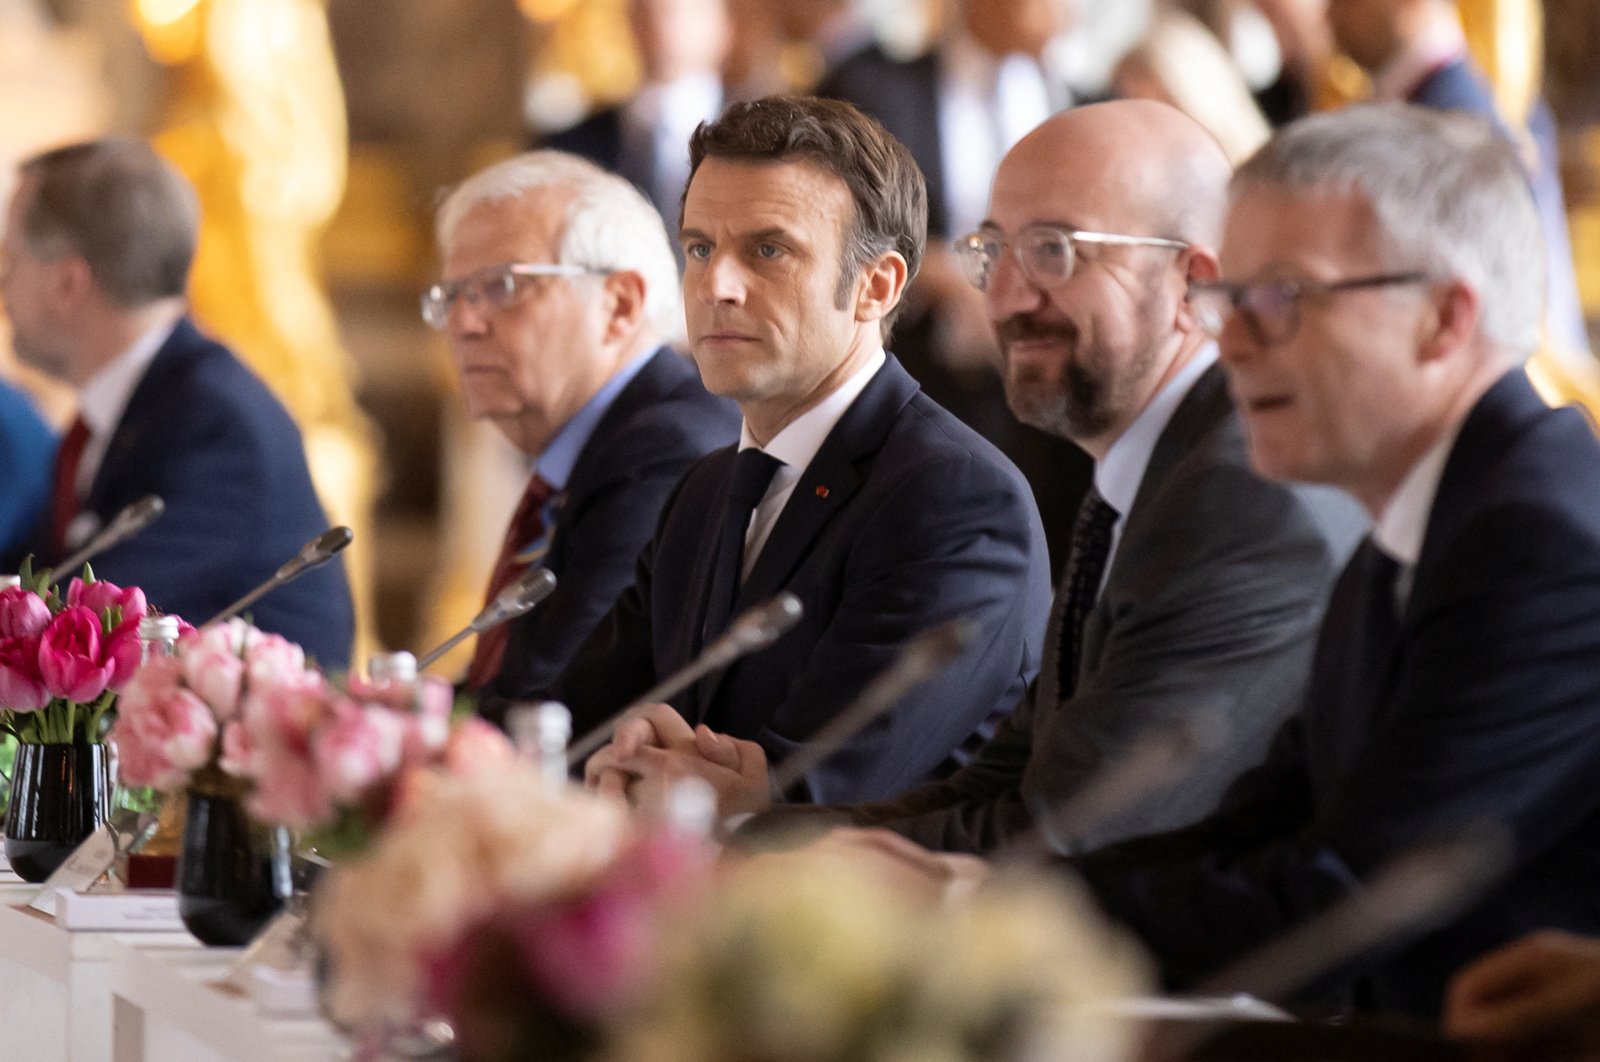 French President Emmanuel Macron sits by President of the European Council Charles Michel and High Representative of the European Union for Foreign Affairs and Security Policy Josep Borrell, and EU heads of state as he attends an informal meeting at the Chateau de Versailles, in Versailles, France, March 11, 2022. (Reuters Photo)